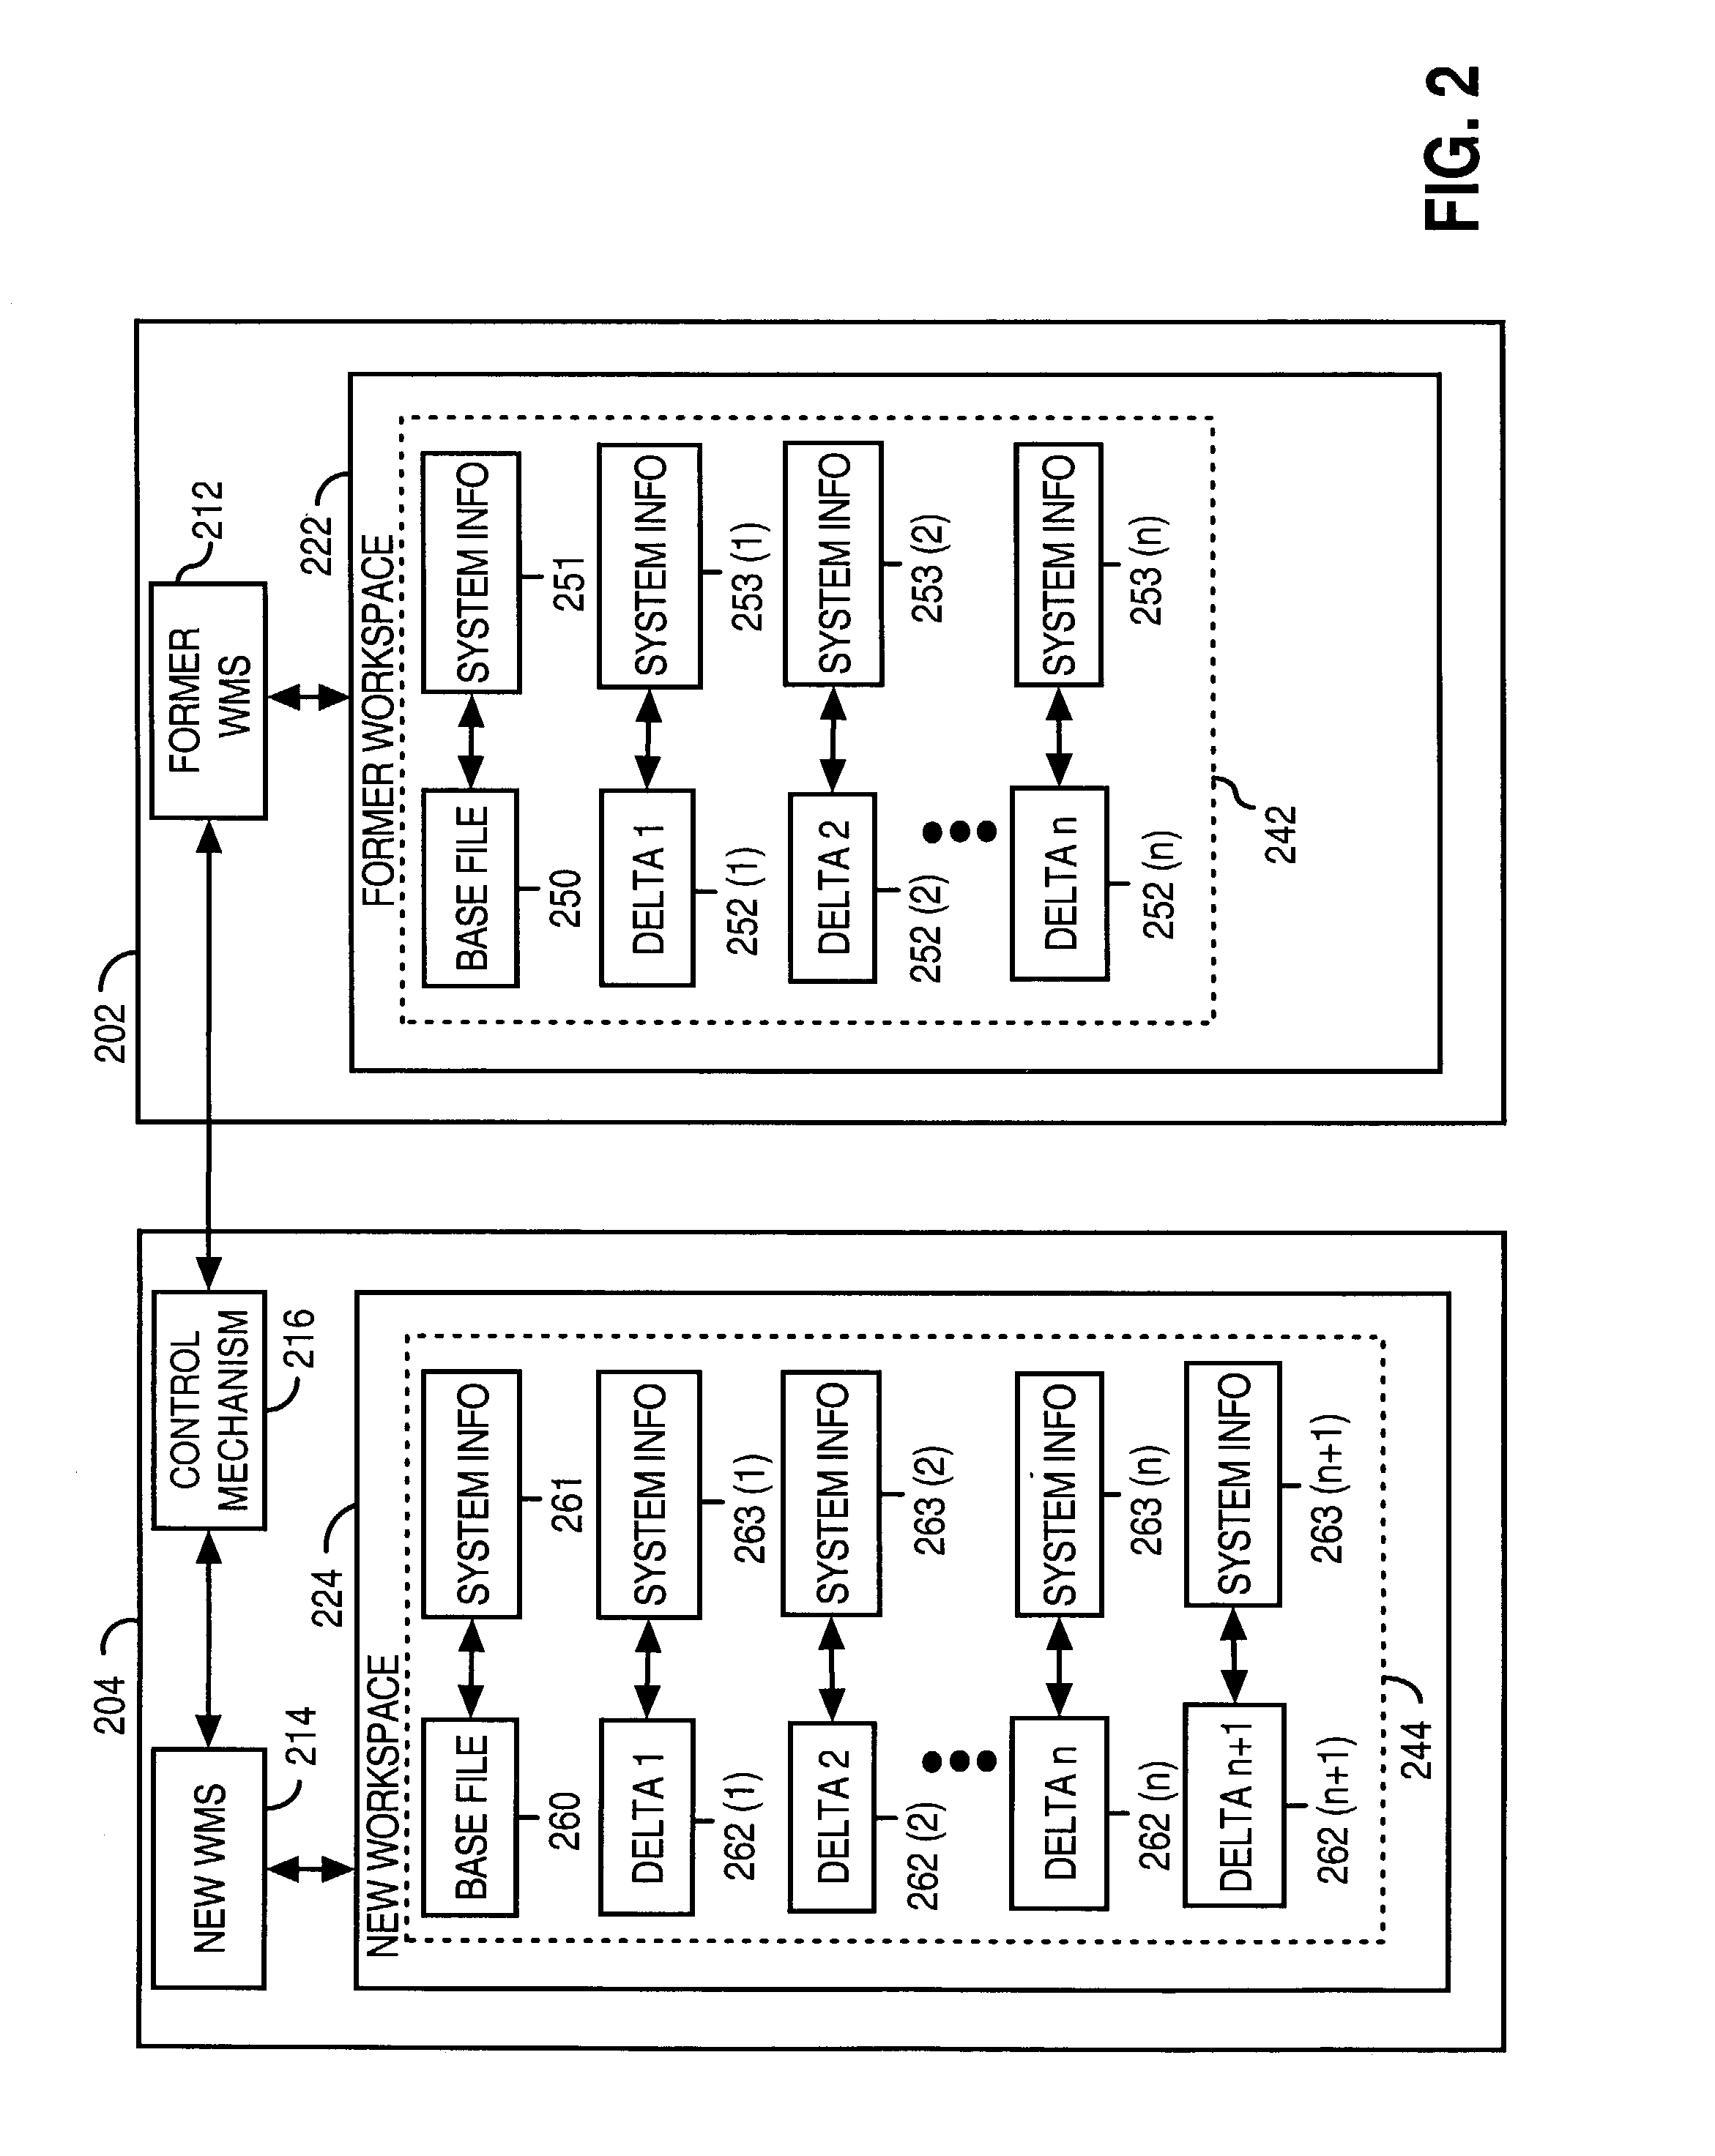 Mechanism for migrating a file sequence with versioning information from one workspace to another